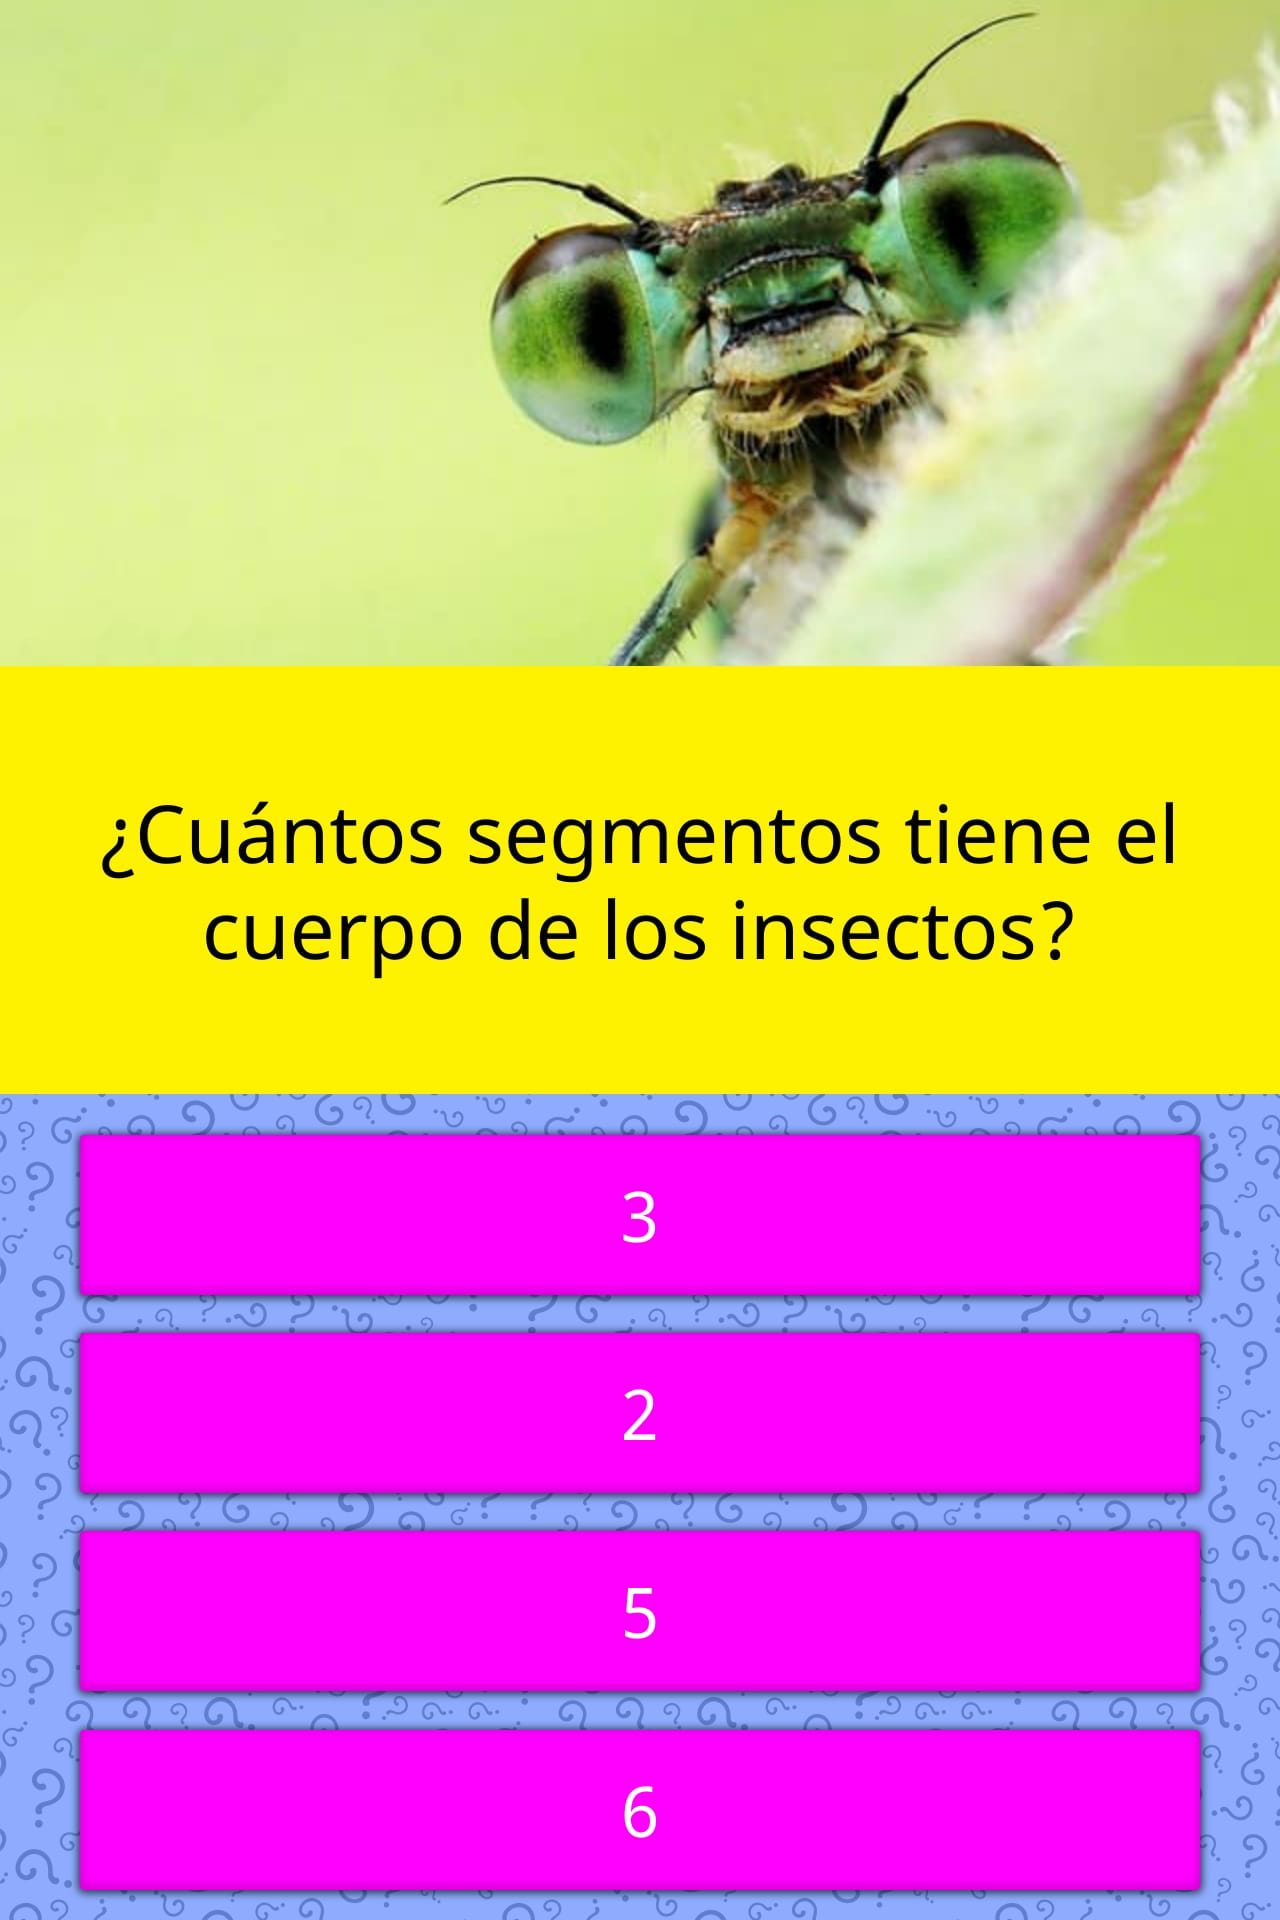 How many legs do insects have and how many body segments?